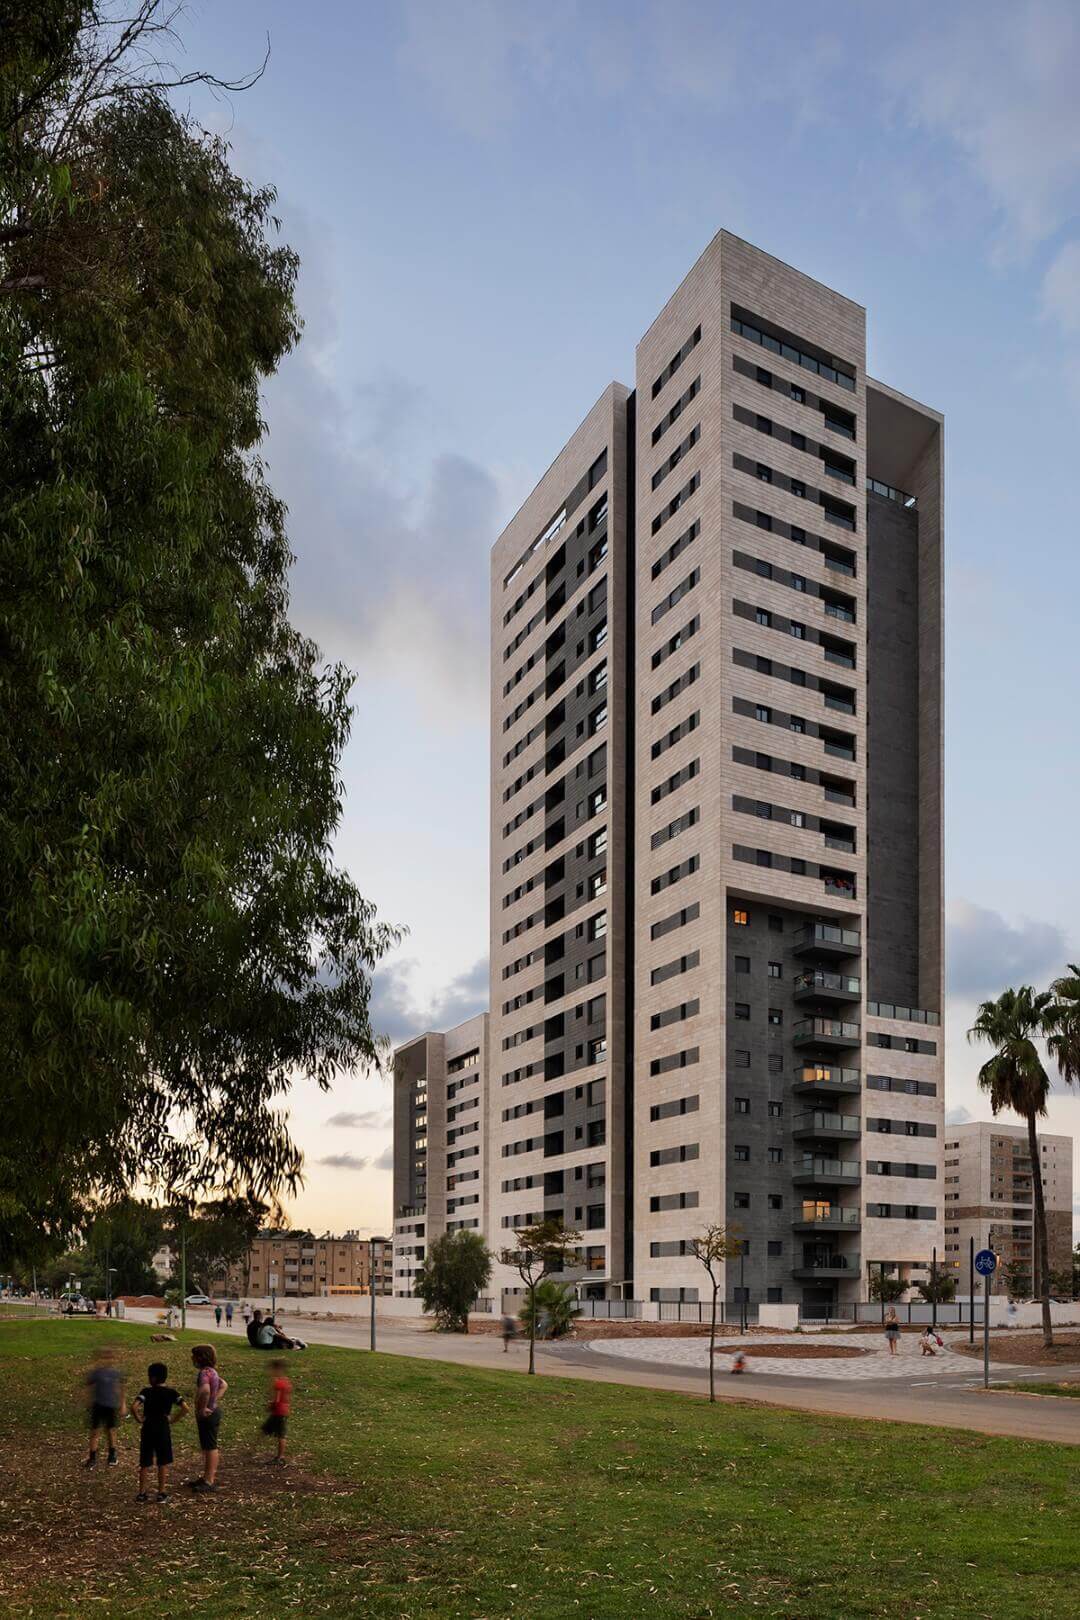 Simulation for the buildings of the UNIK&MORE project in Haifa